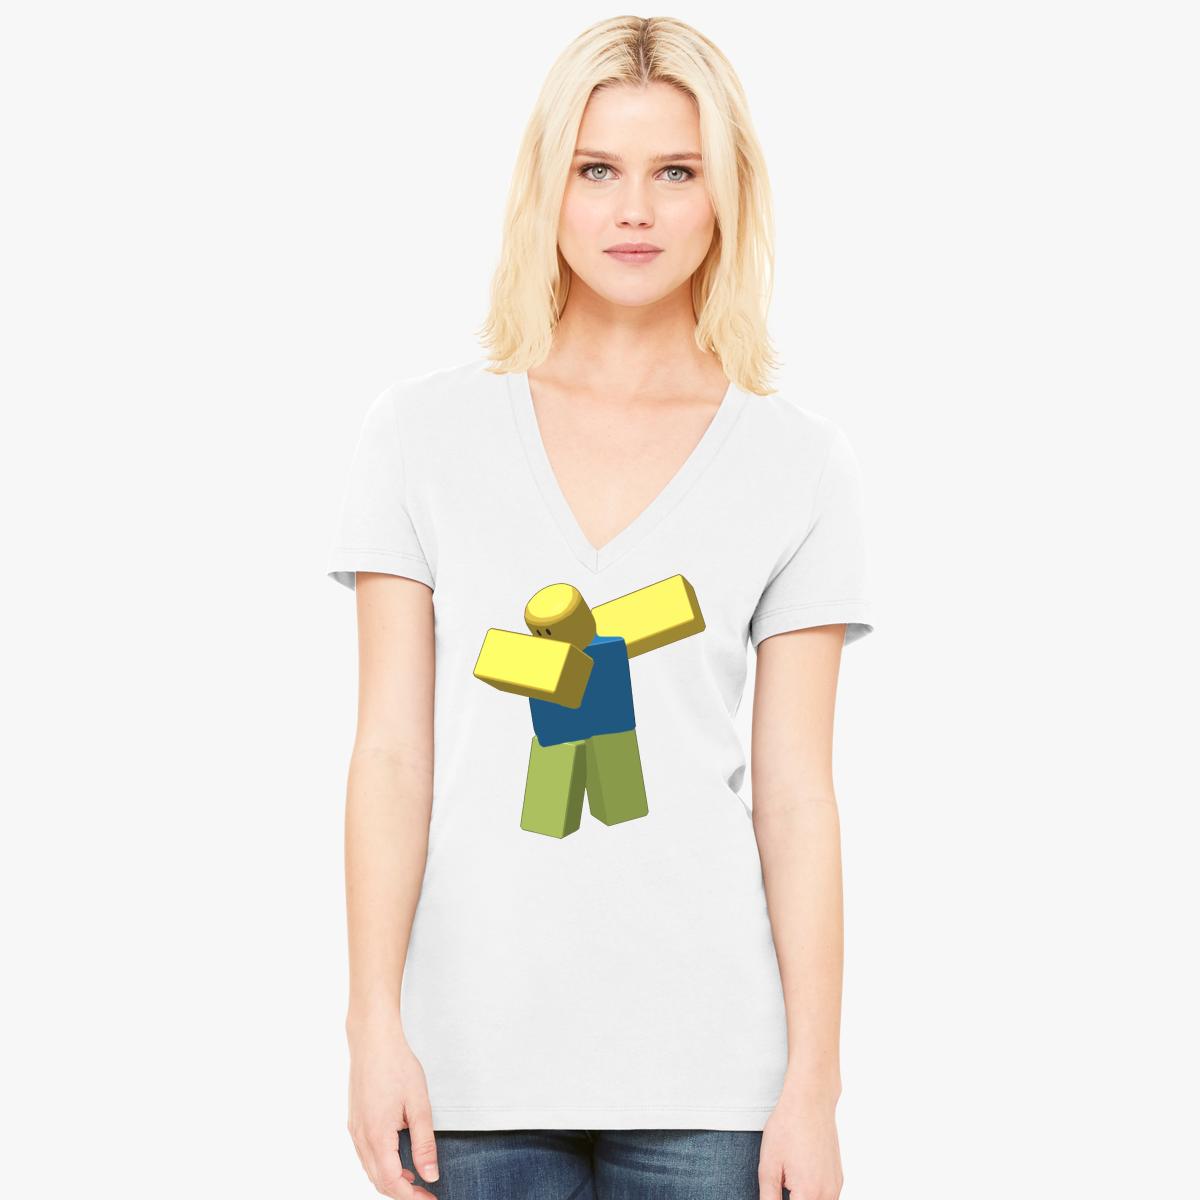 Coolest Roblox T Shirts Toffee Art - cool t shirts on roblox toffee art